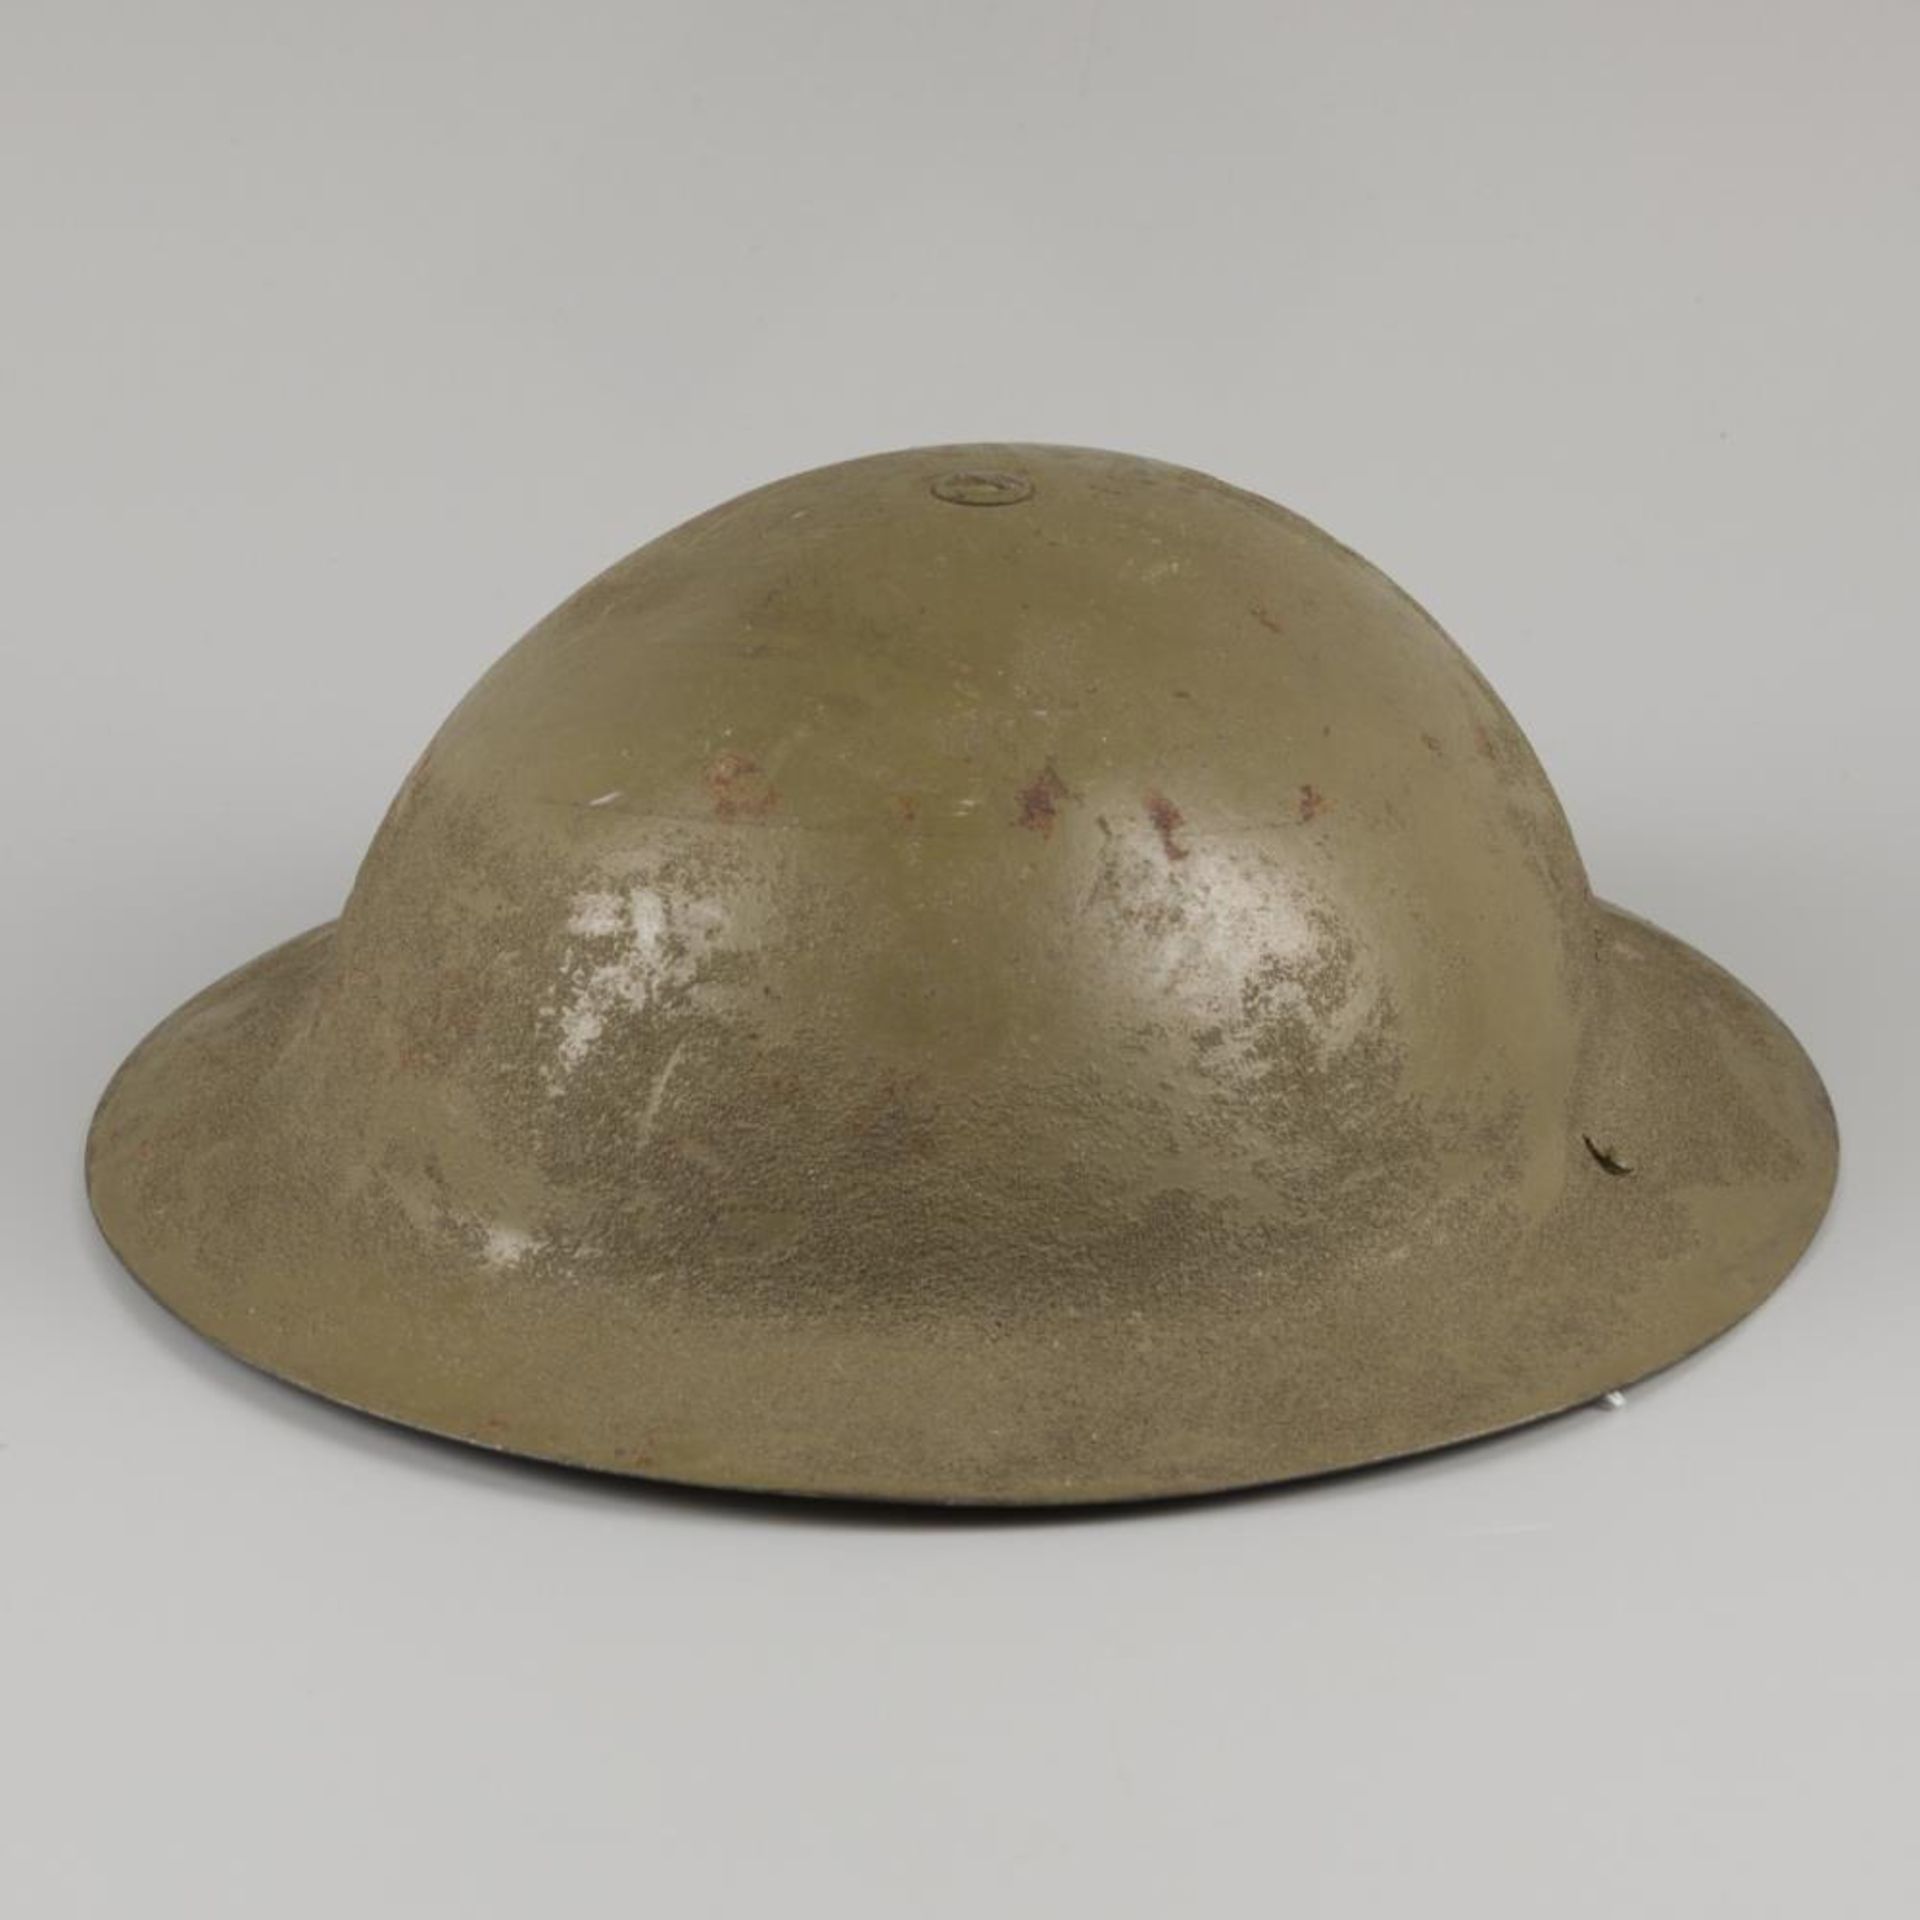 A "Brodie" helmet from WWII, England, 1st half 20th century.